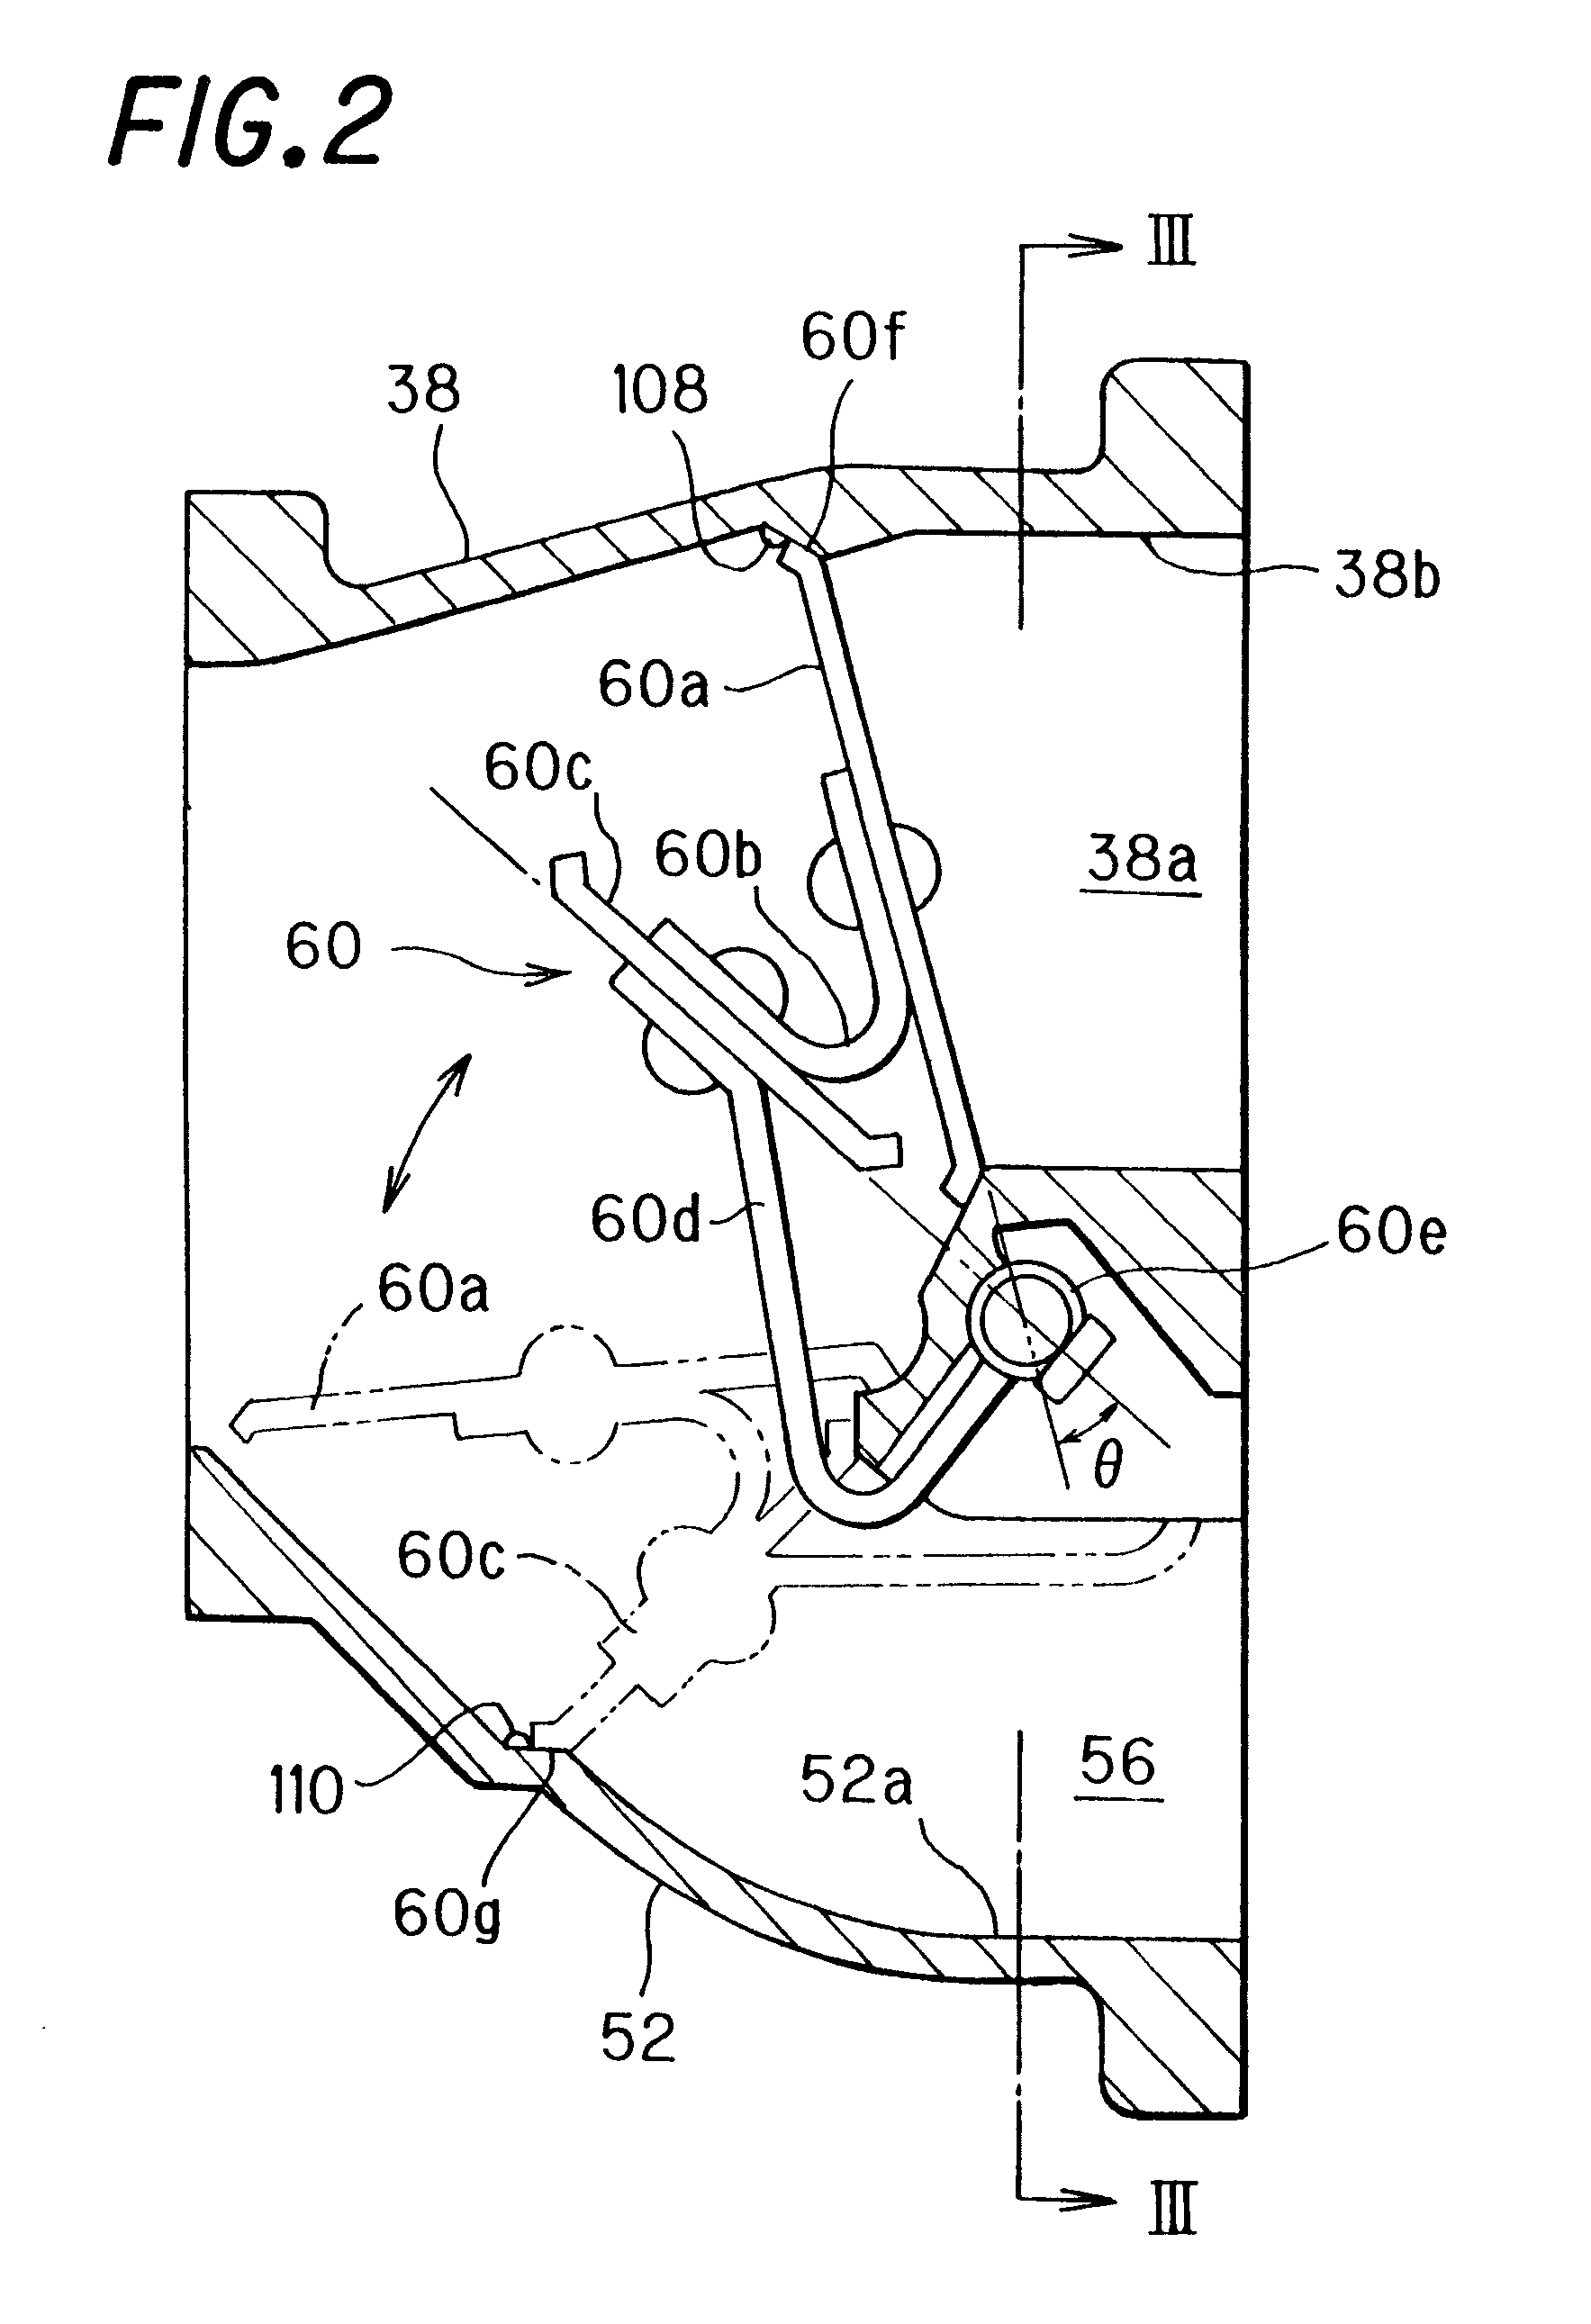 Exhaust switch-over valve malfunction detection system of internal combustion engine